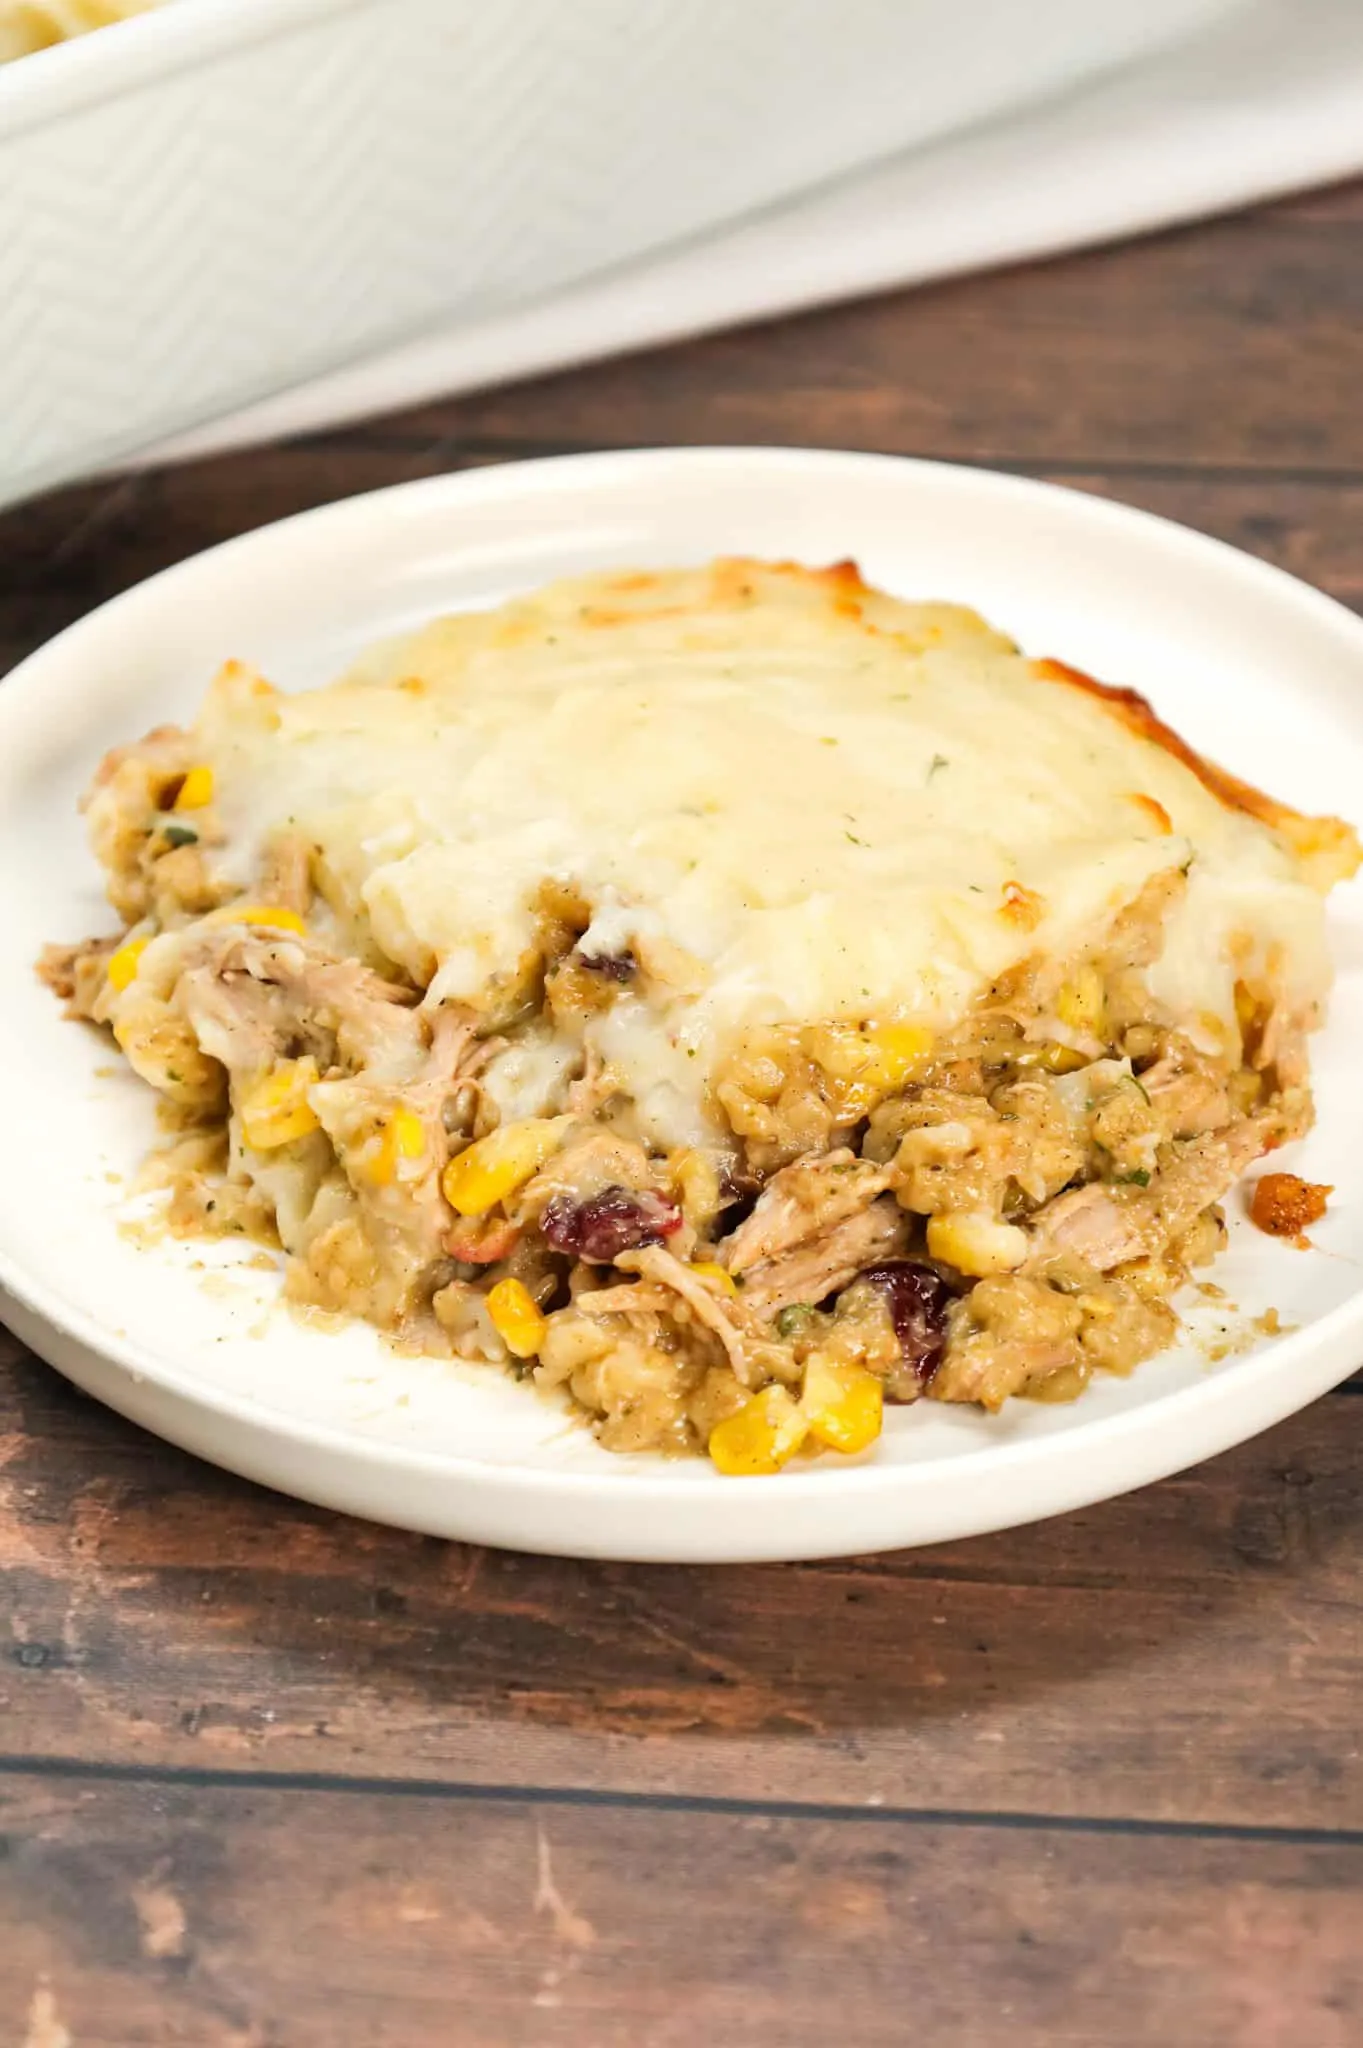 Turkey Shepherd's Pie is a hearty dinner recipe loaded with shredded turkey, corn, Stove Top stuffing mix, cream of chicken soup, cranberries and topped with mashed potatoes.